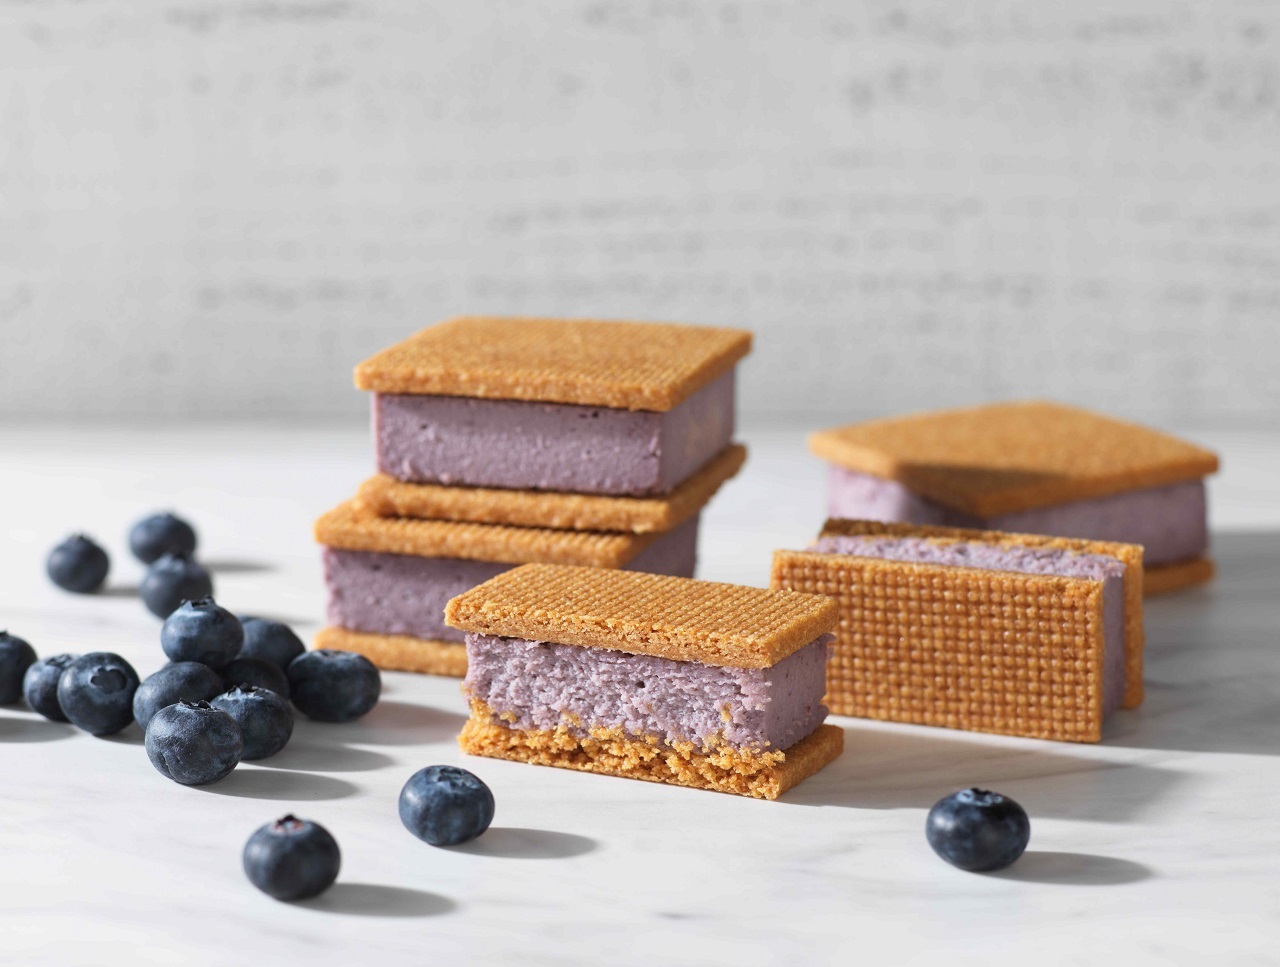 (Blueberry Cheesecake Sandwiches Now on Cheese Tokyo station